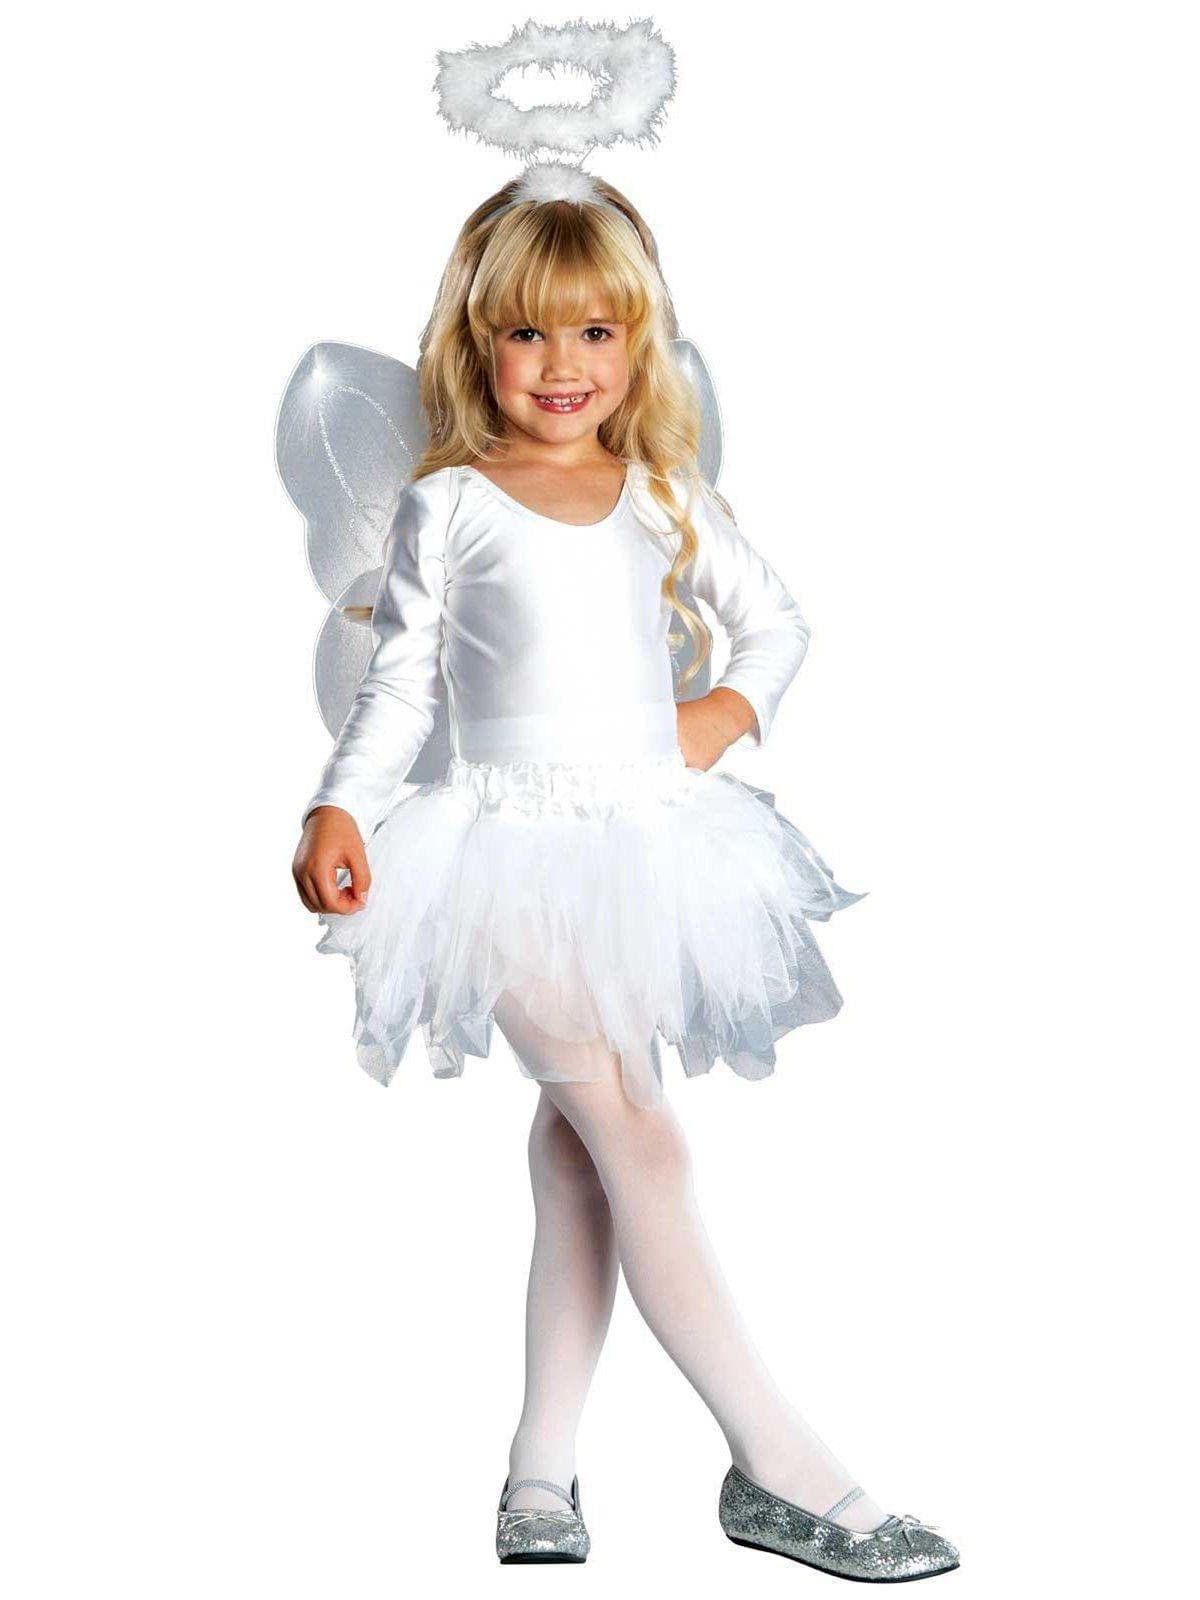 Sweet Angel Costume for Toddlers - costumes.com